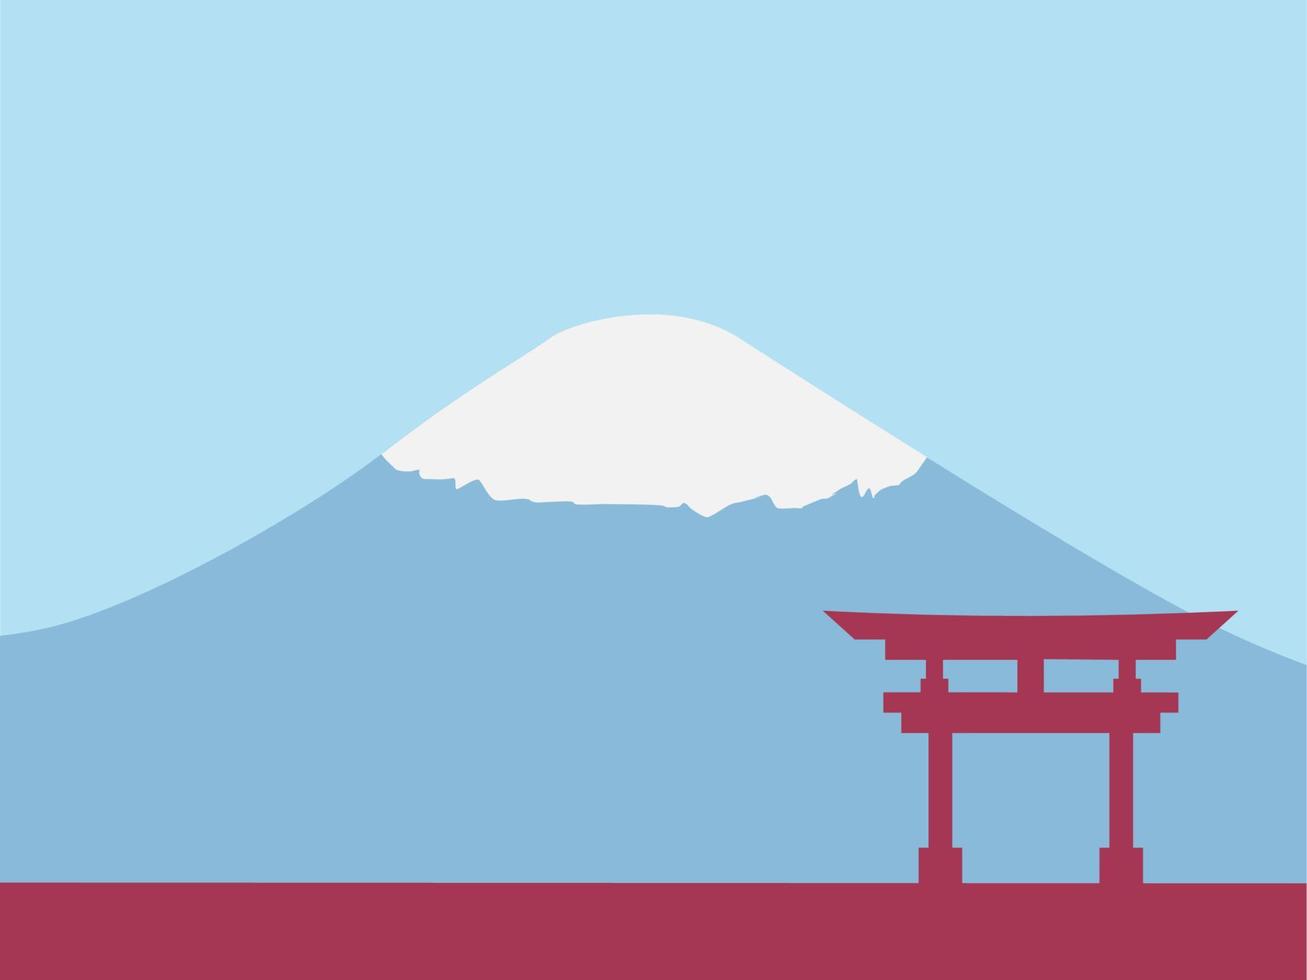 Japanese Culture Day Background or Greeting Card Design. Illustration of a Japanese gate with mount fuji in the background, and a copy space area. Suitable placed on content with that theme. vector